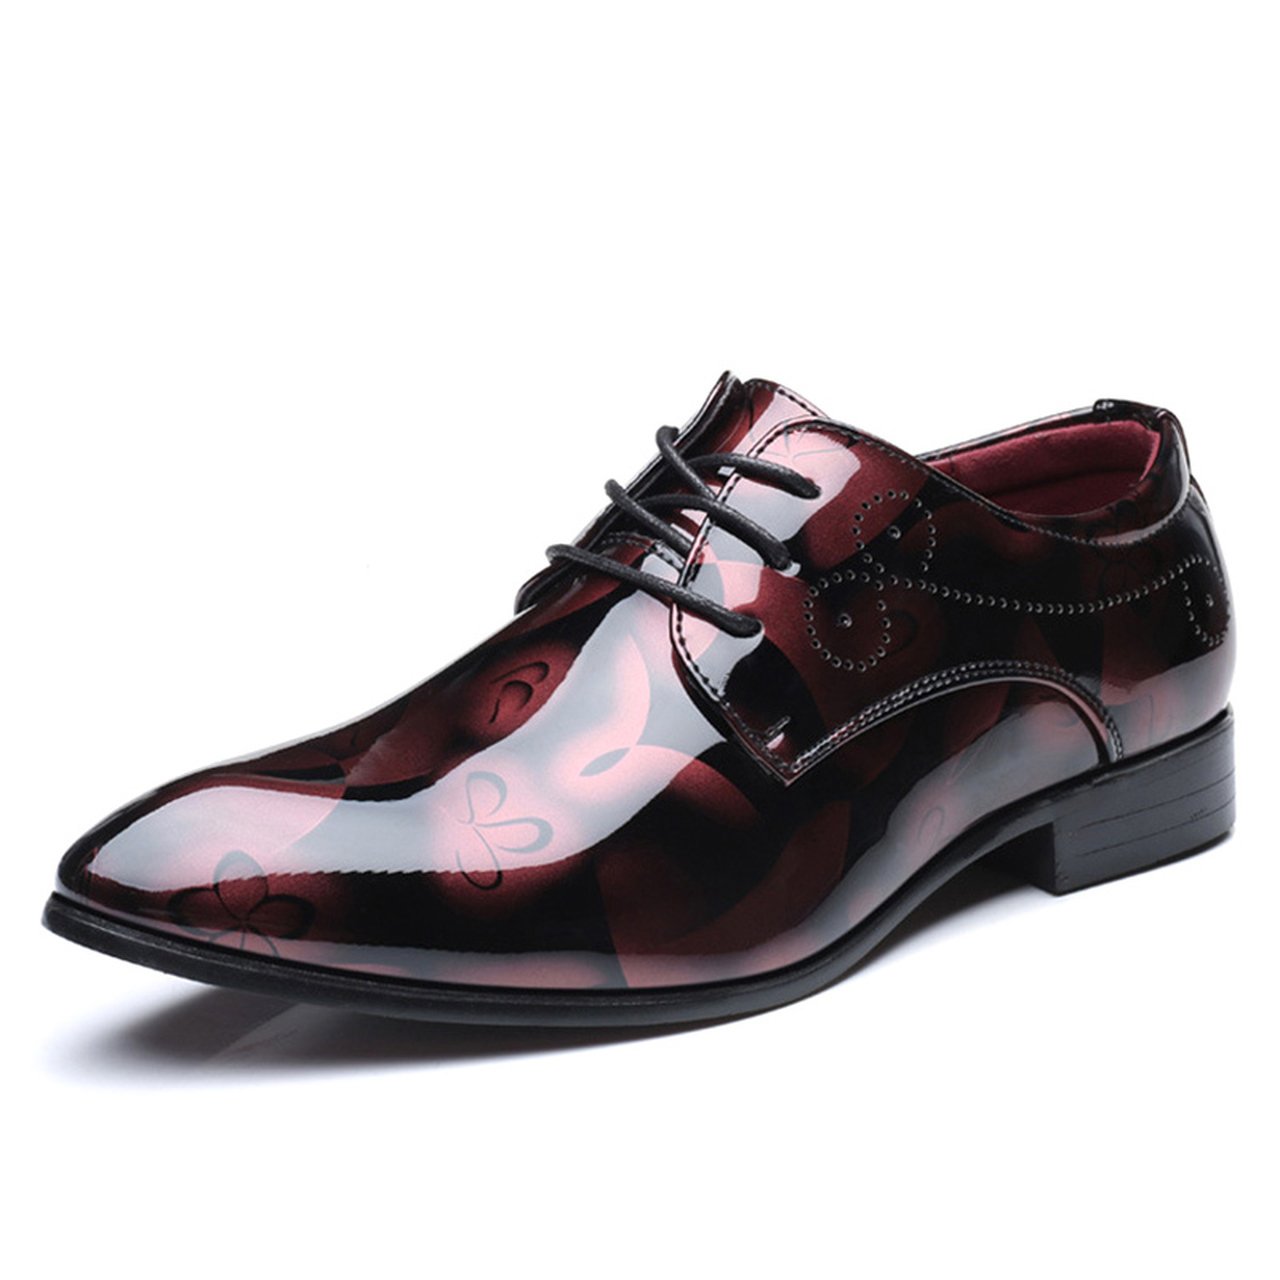 COSIDRAM Patent Leather Oxford Shoes For Men Dress Shoes Men Formal Shoes Pointed Toe Business Wedding Plus Size 49 50 RME 308